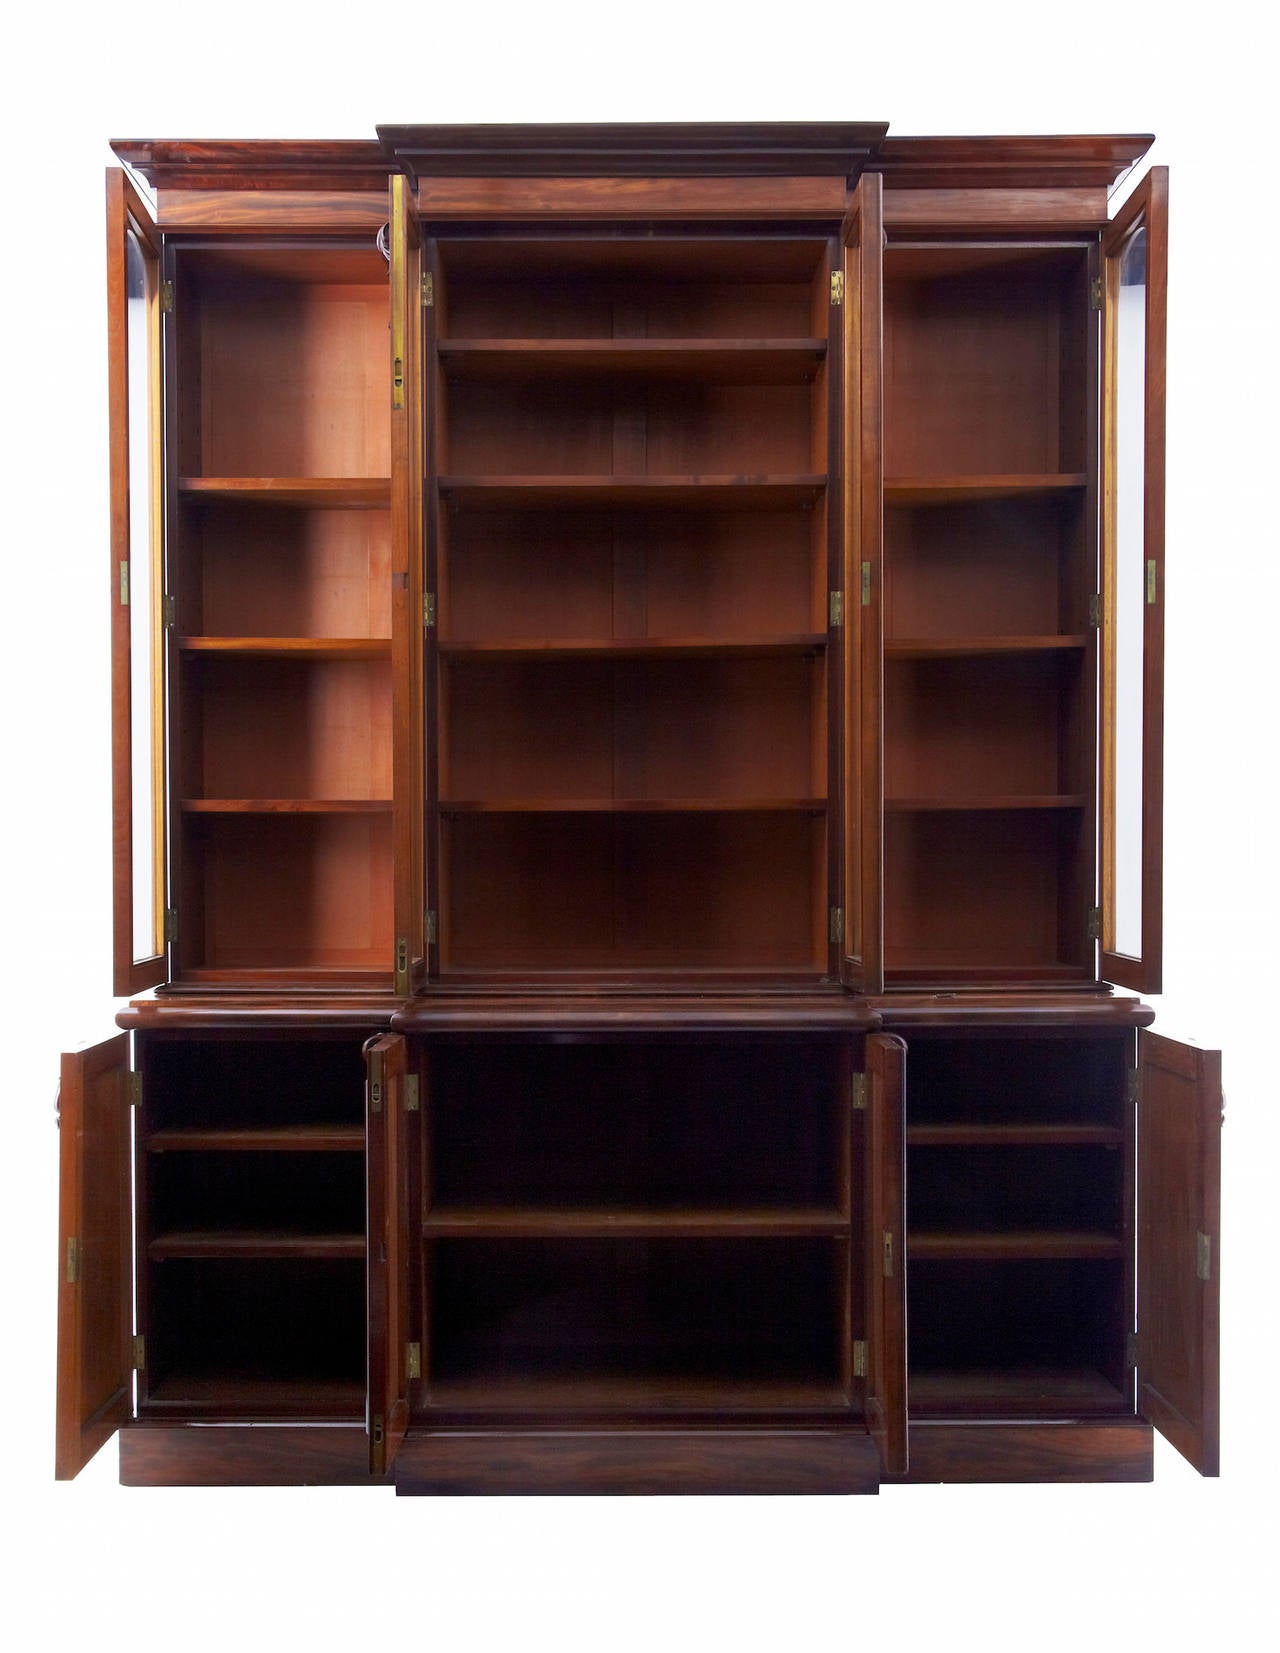 Finest quality bookcase, circa 1850.
Comprising of five sections. Plinth, cupboard, middle section, glazed unit and cornice.
Made front the finest quality matching veneers.
With applied lambs tongue carvings. Swags and beading to doors.
Top